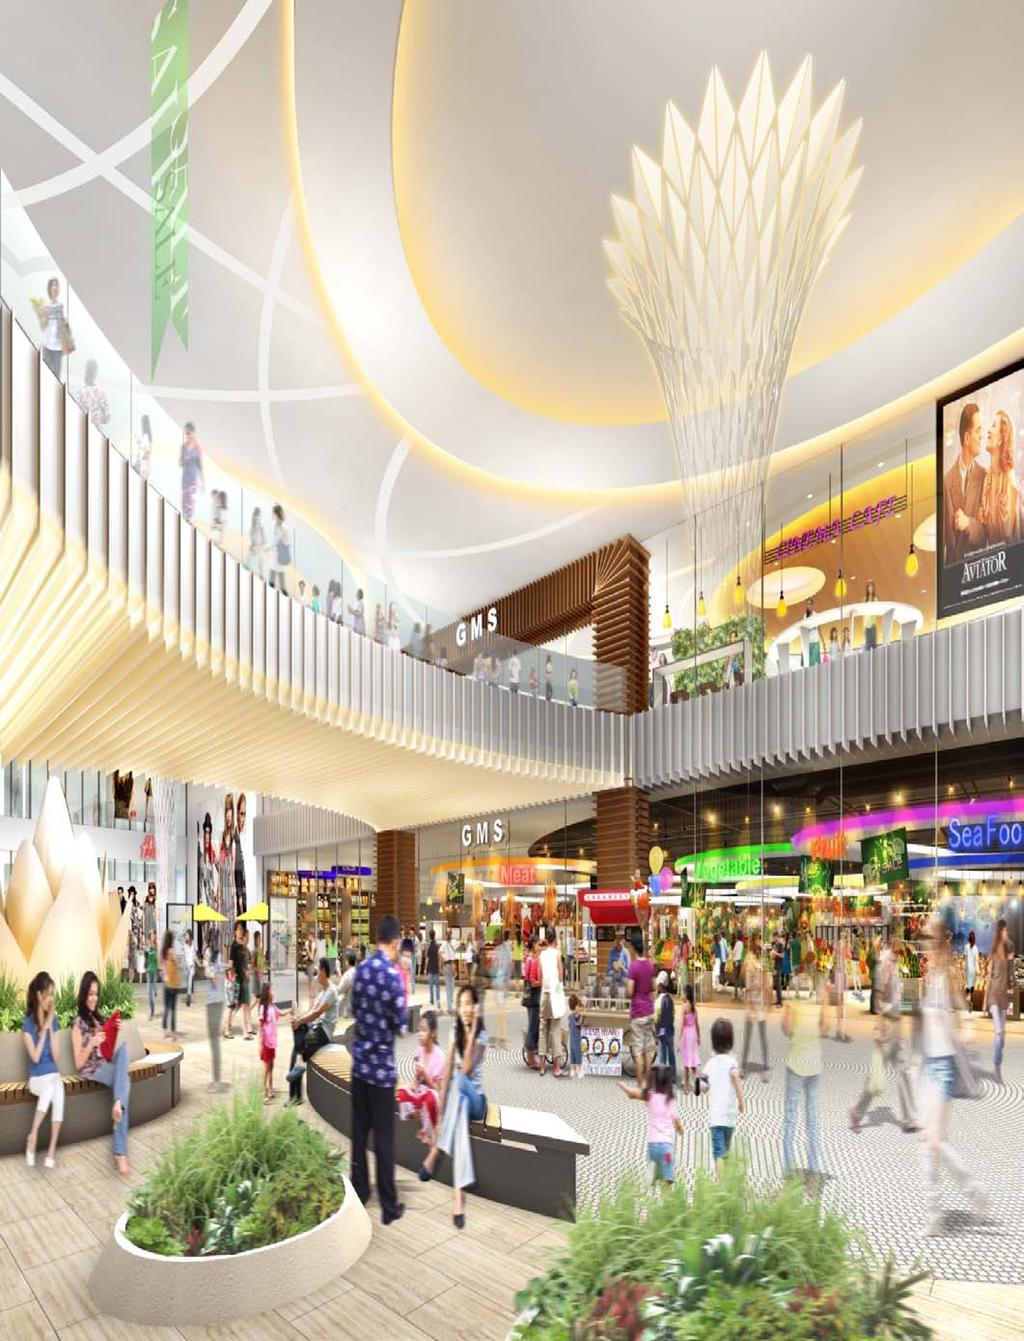 Tokyu Binh Duong Garden city is one of the leading projects in Binh Duong New